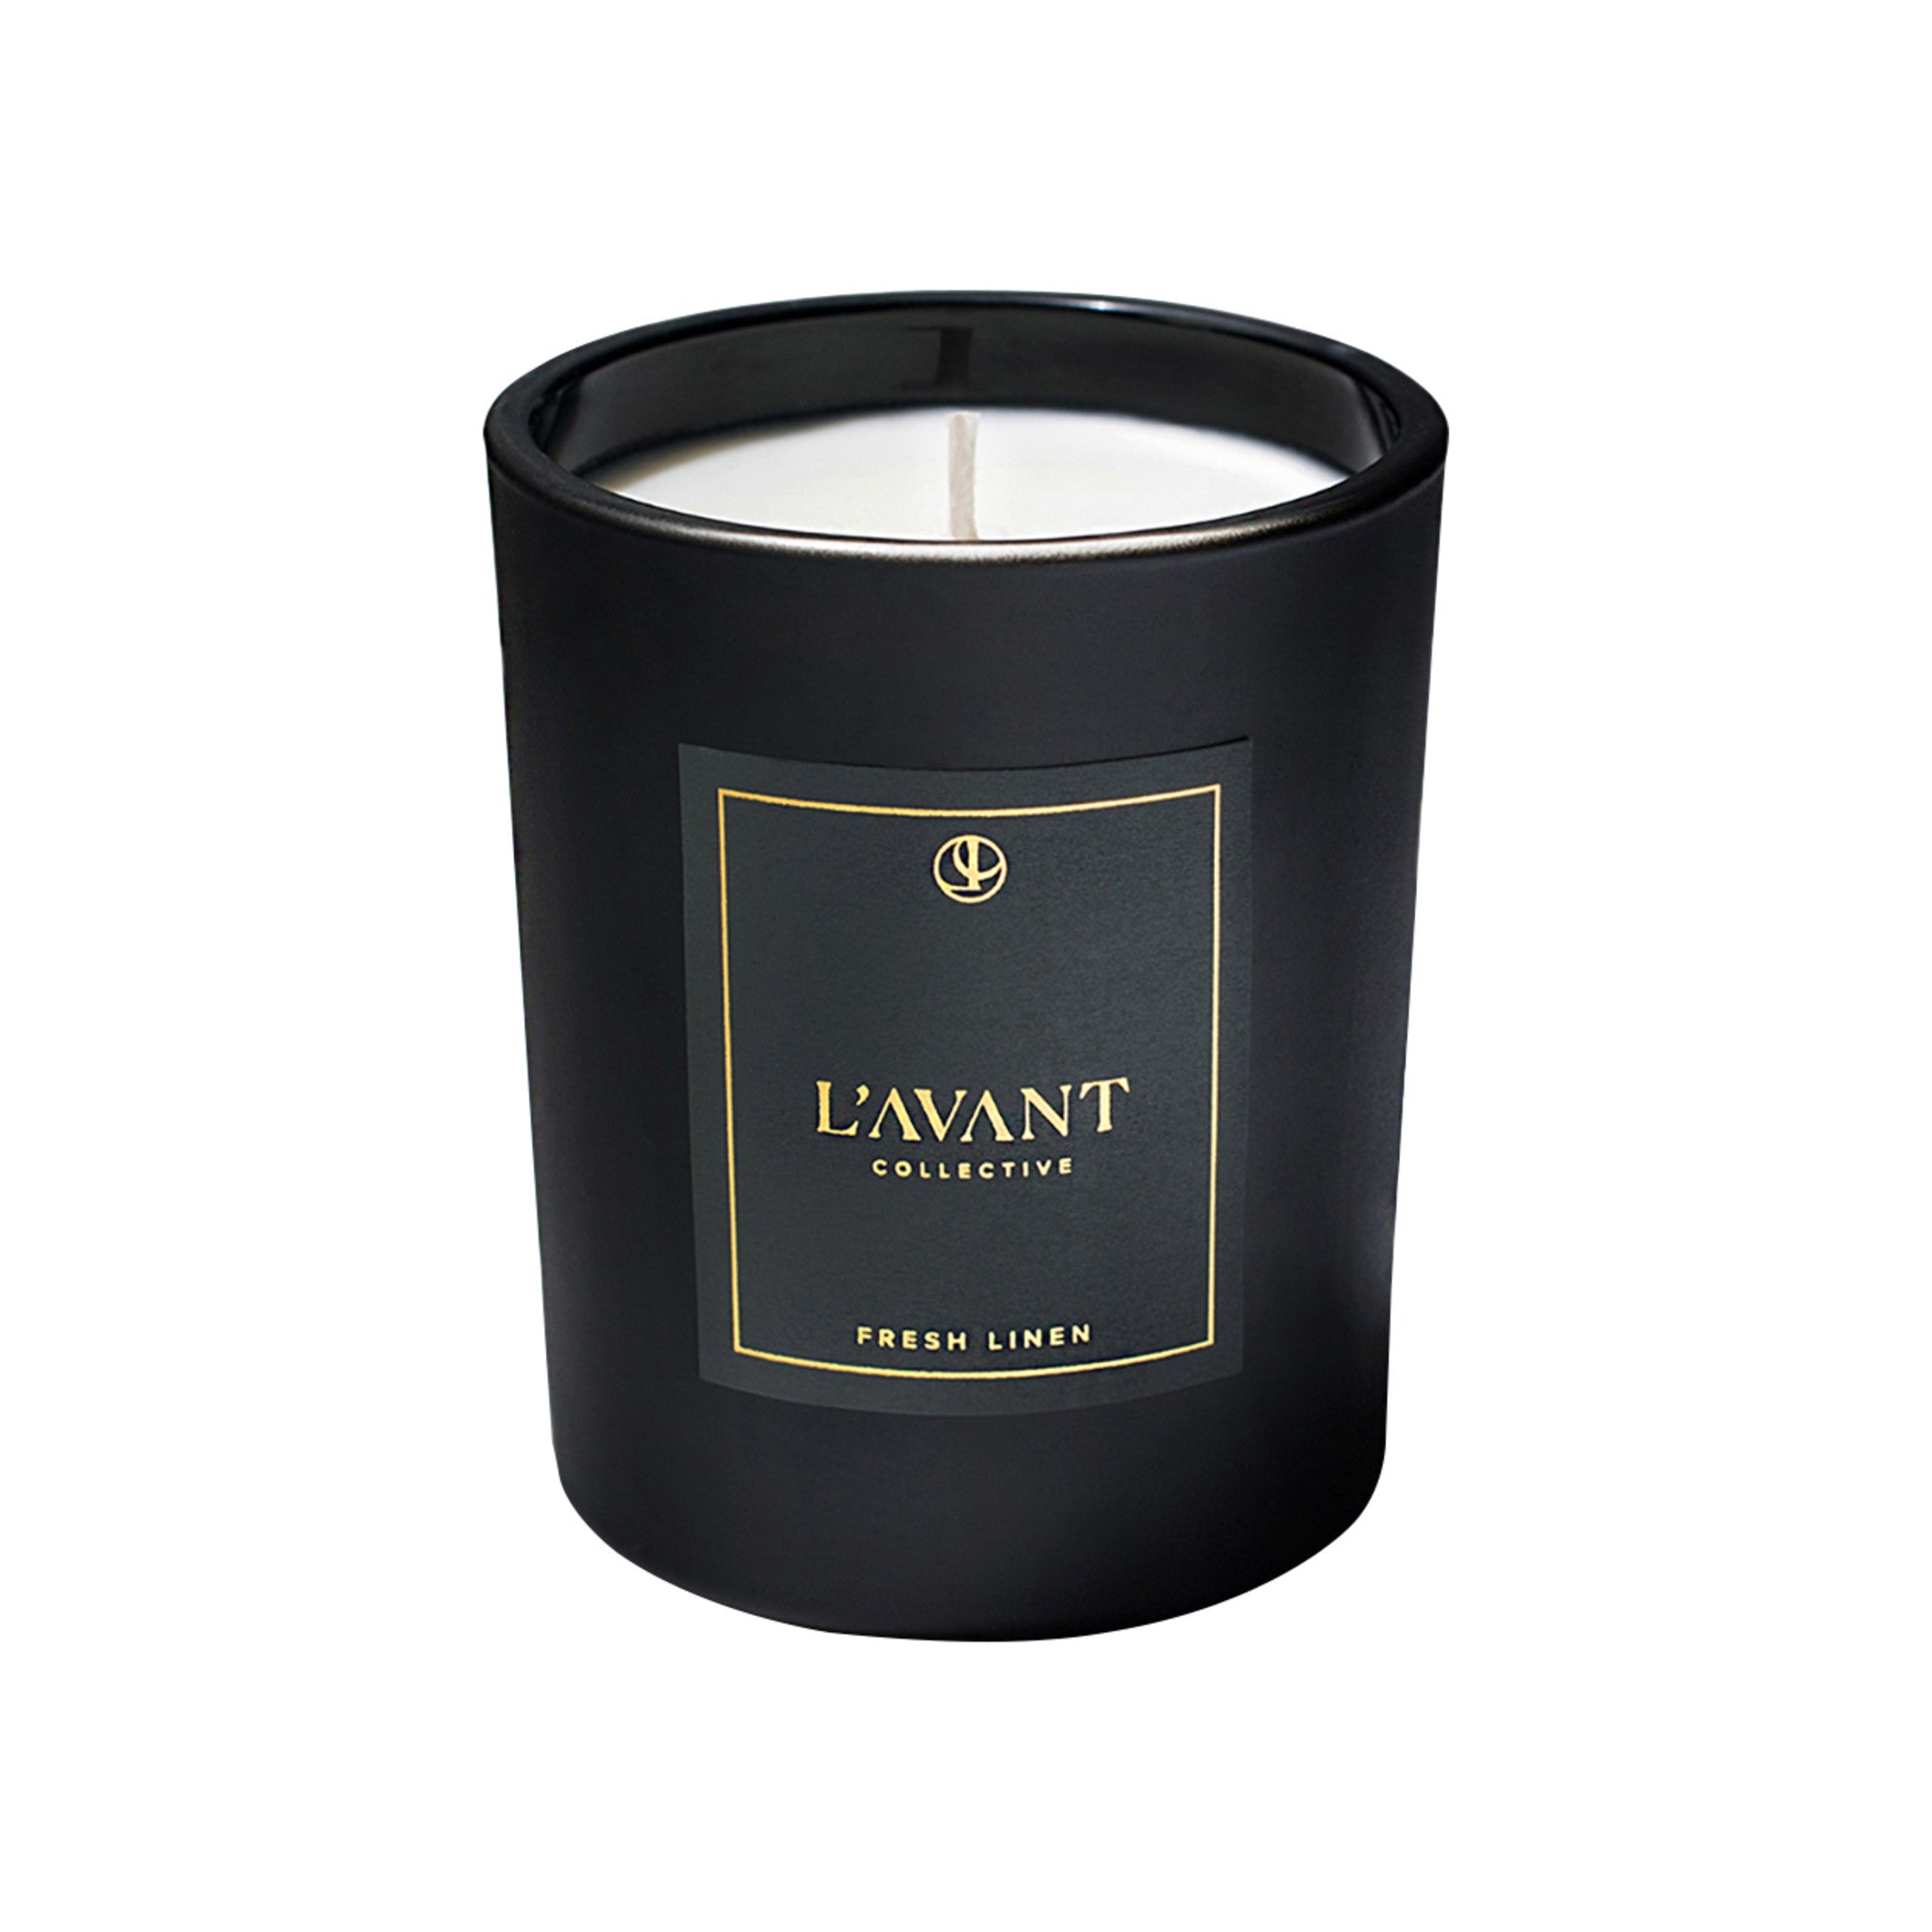 L’Avant Collective Fresh Linen Candle Color/Shade variant: Black main image.